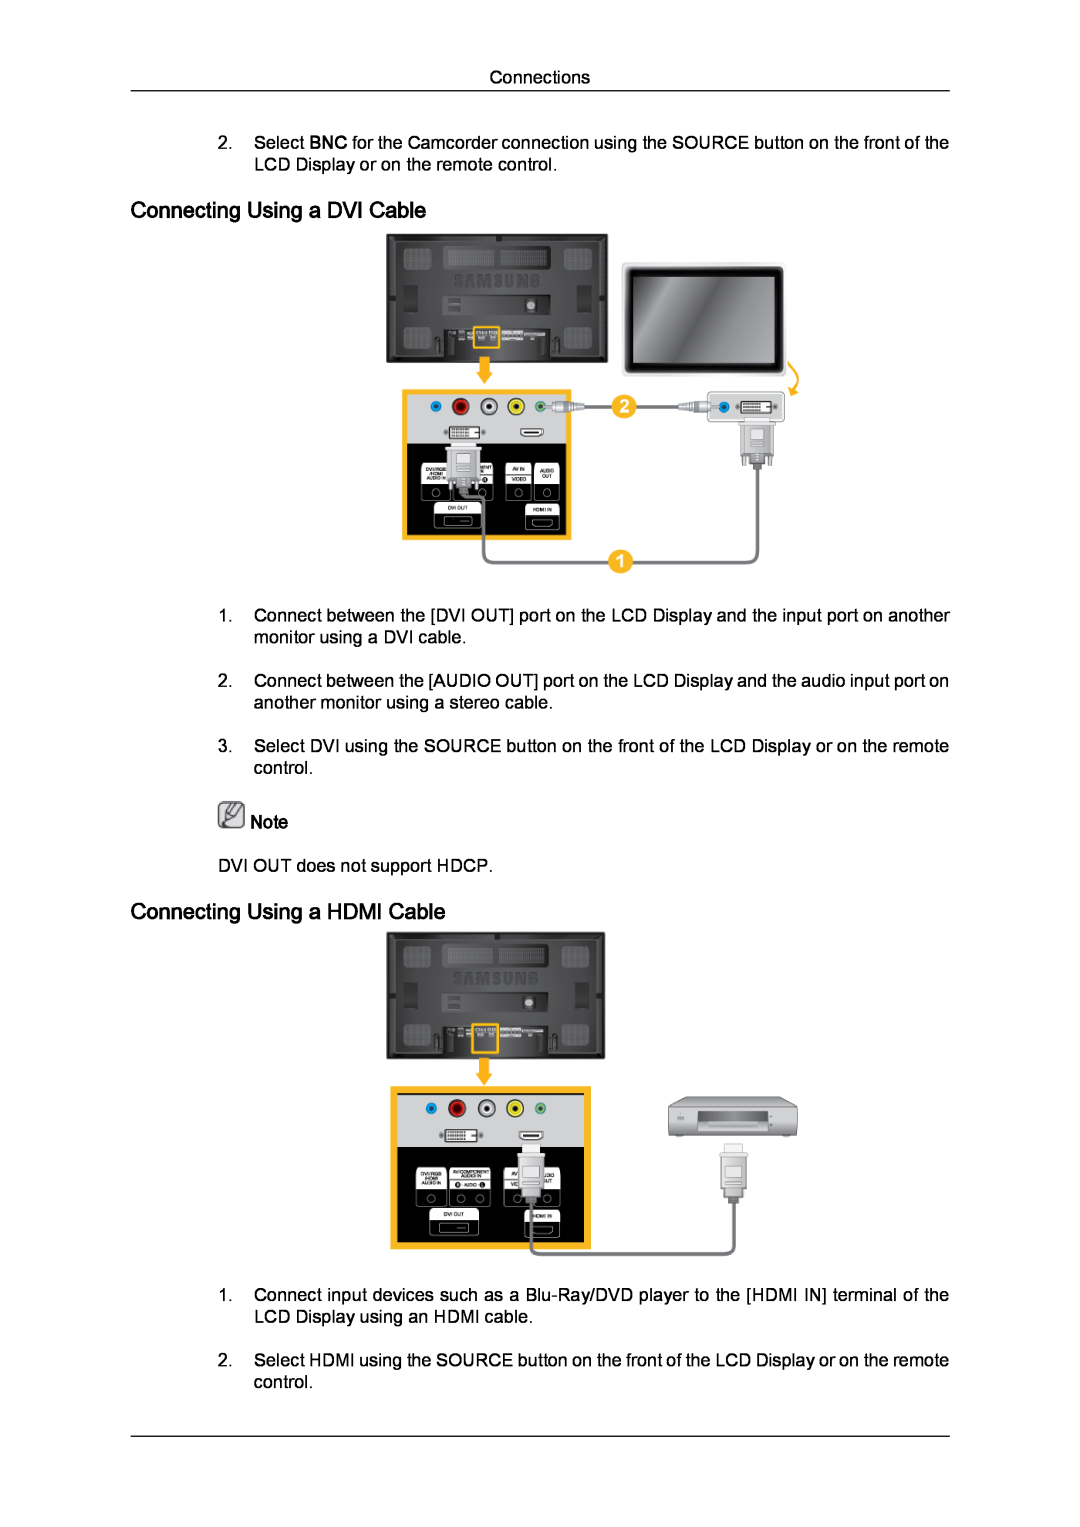 Samsung 650MP-2, 650FP-2 user manual Connecting Using a DVI Cable, Connecting Using a HDMI Cable 